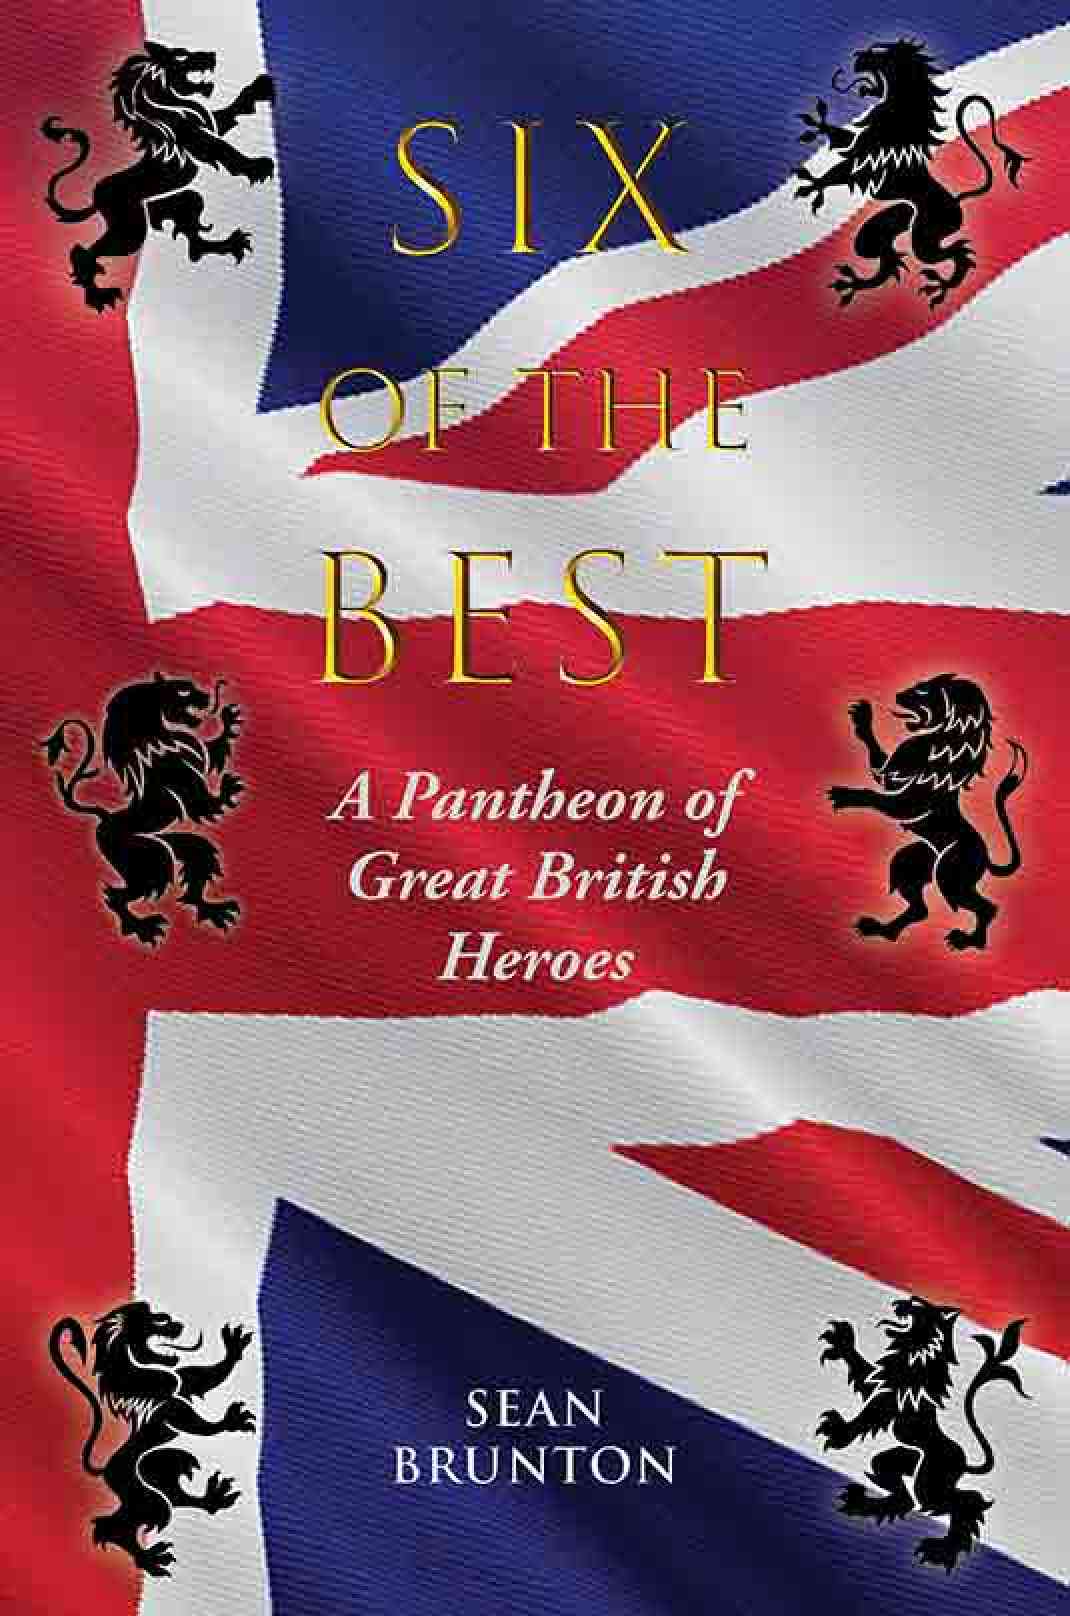 The cover of Six of the Best, six heraldic lions posed on the Union Jack